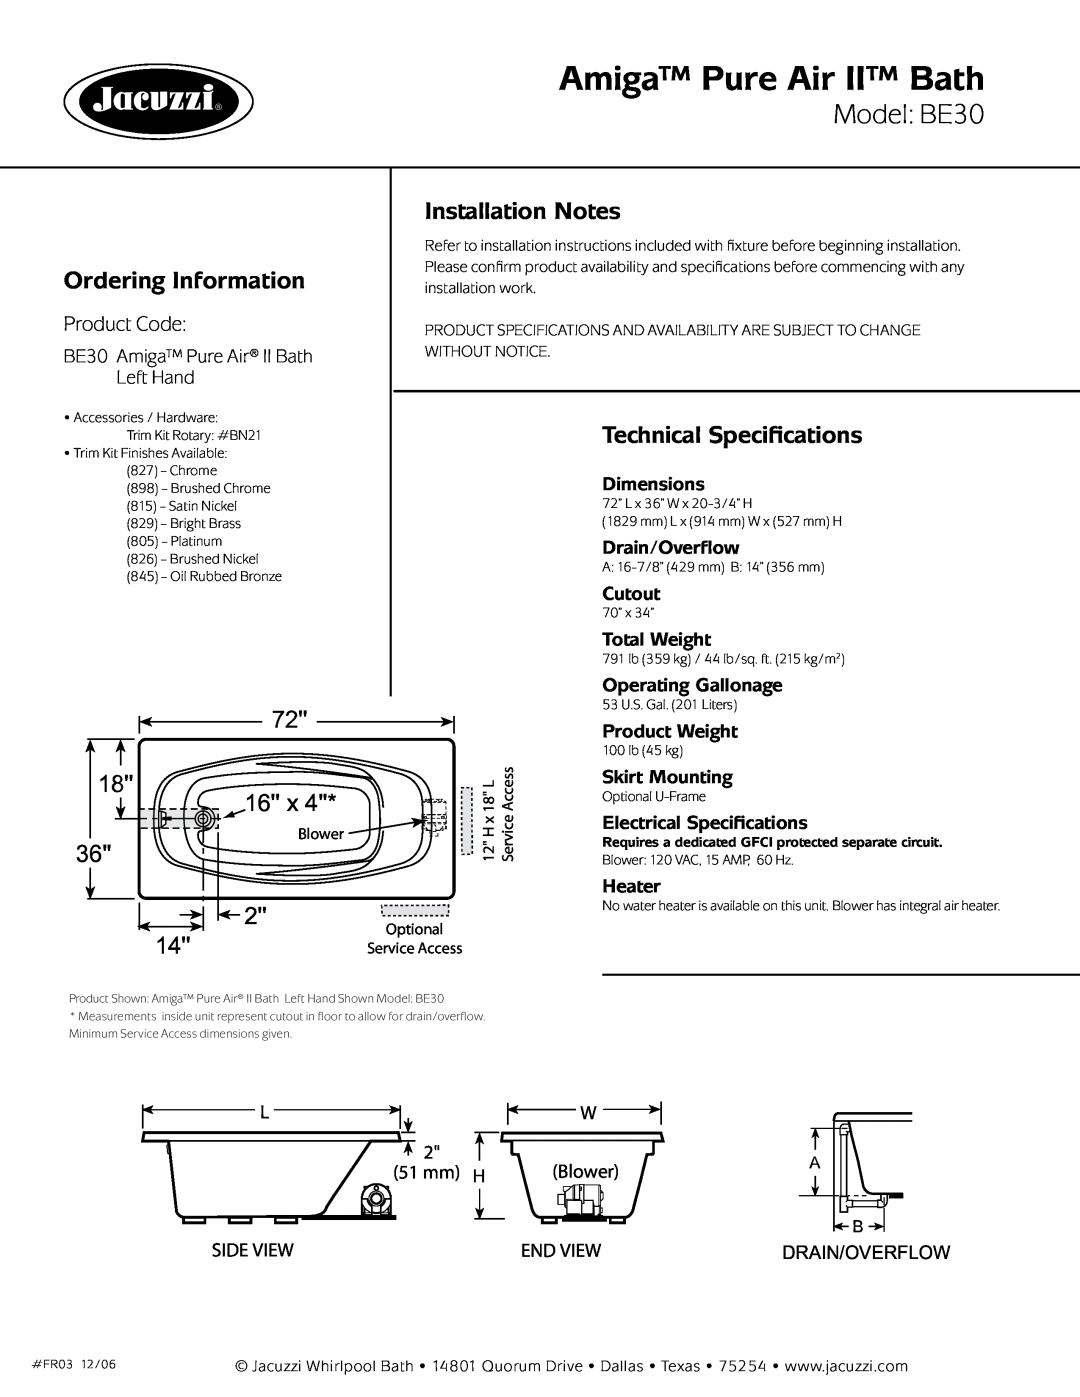 Jacuzzi BE30-LH Amiga Pure Air II Bath, Model BE30, Installation Notes, Technical Specifications, Ordering Information 